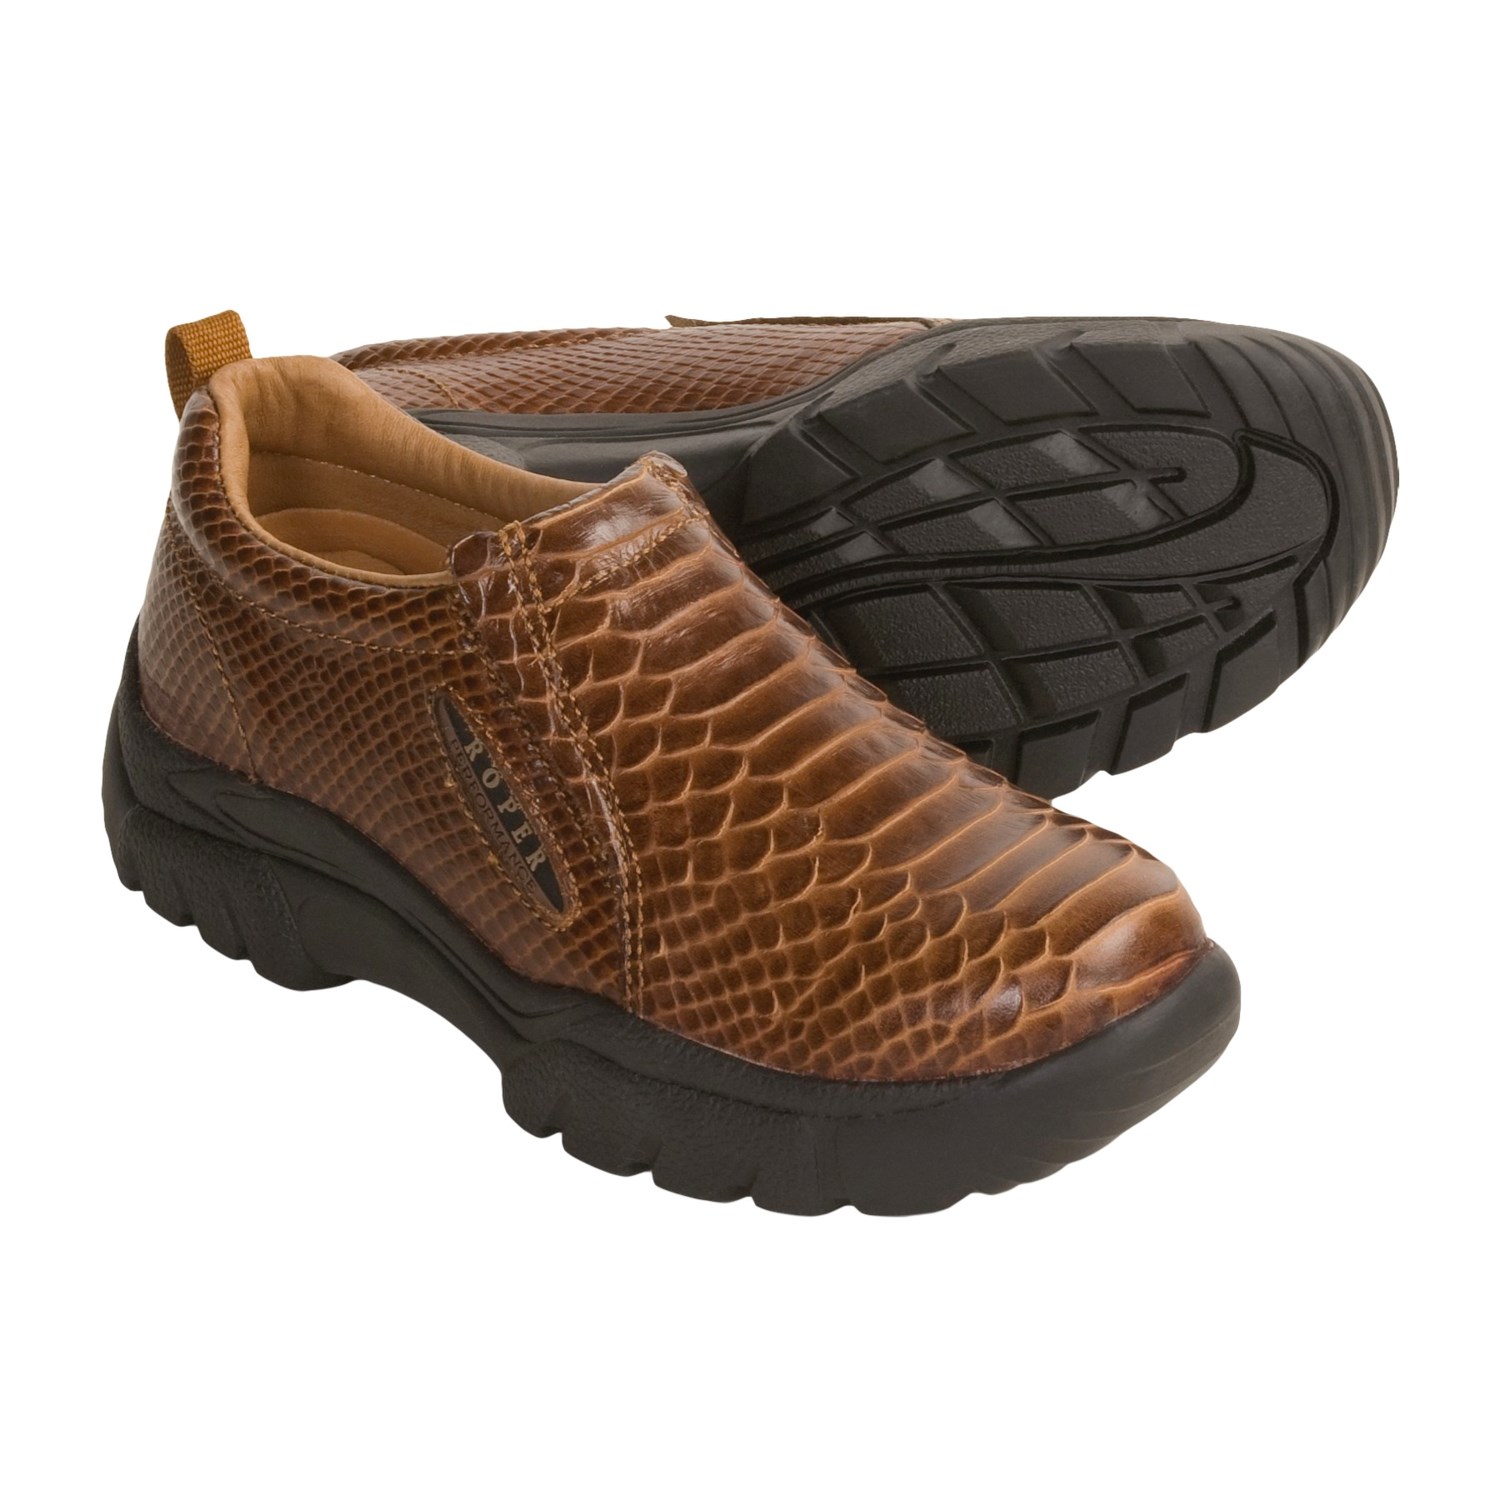 Roper Faux-Snake Belly Shoes (For Women) 2724C - Save 41%